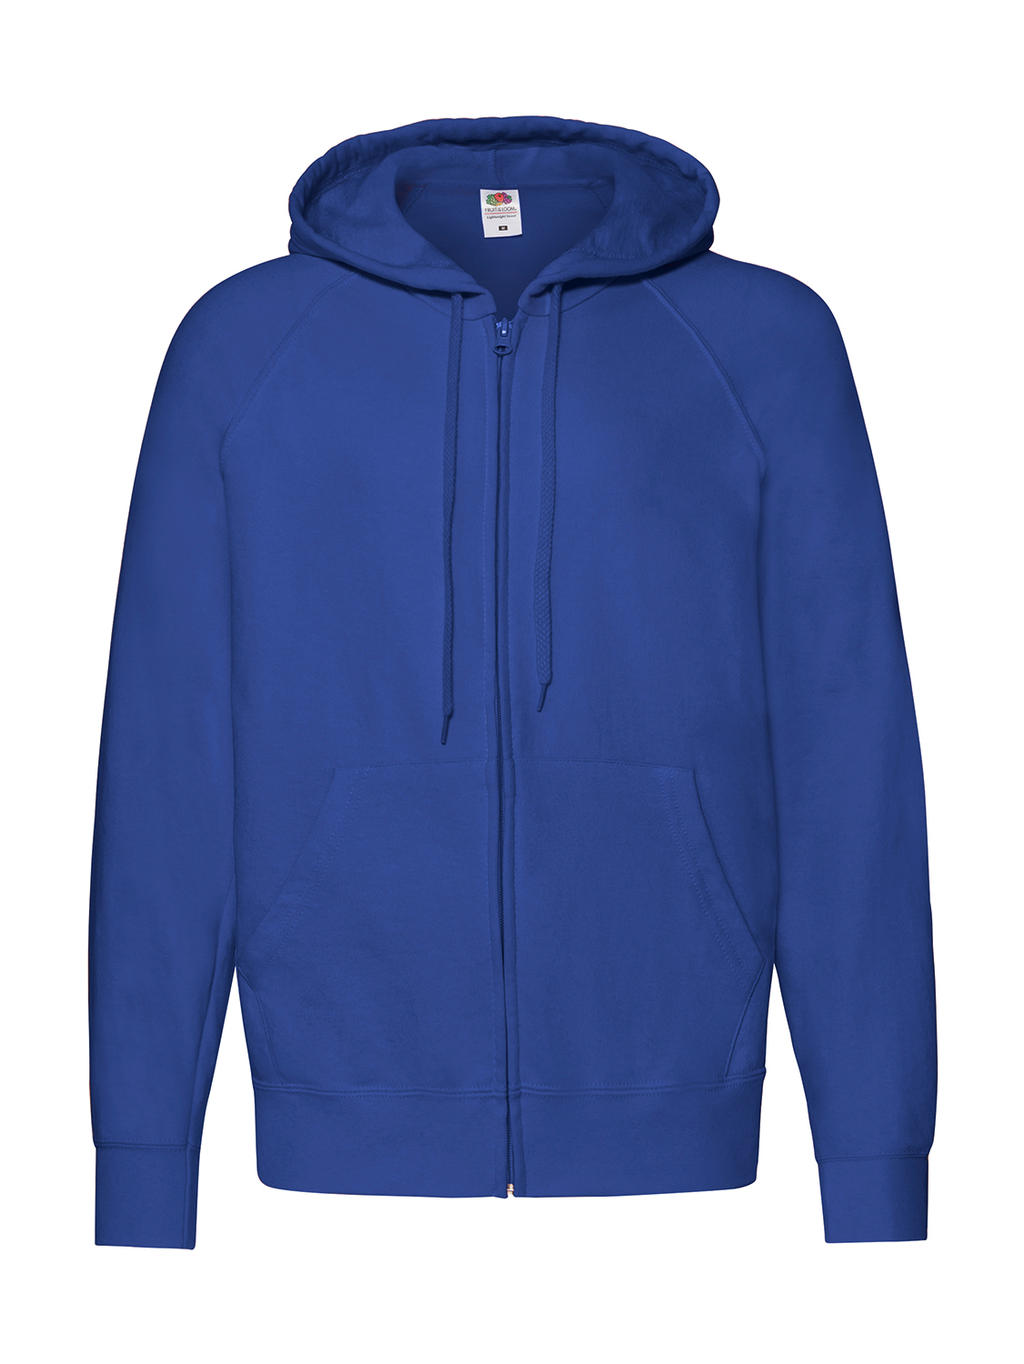  Lightweight Hooded Sweat Jacket in Farbe Royal